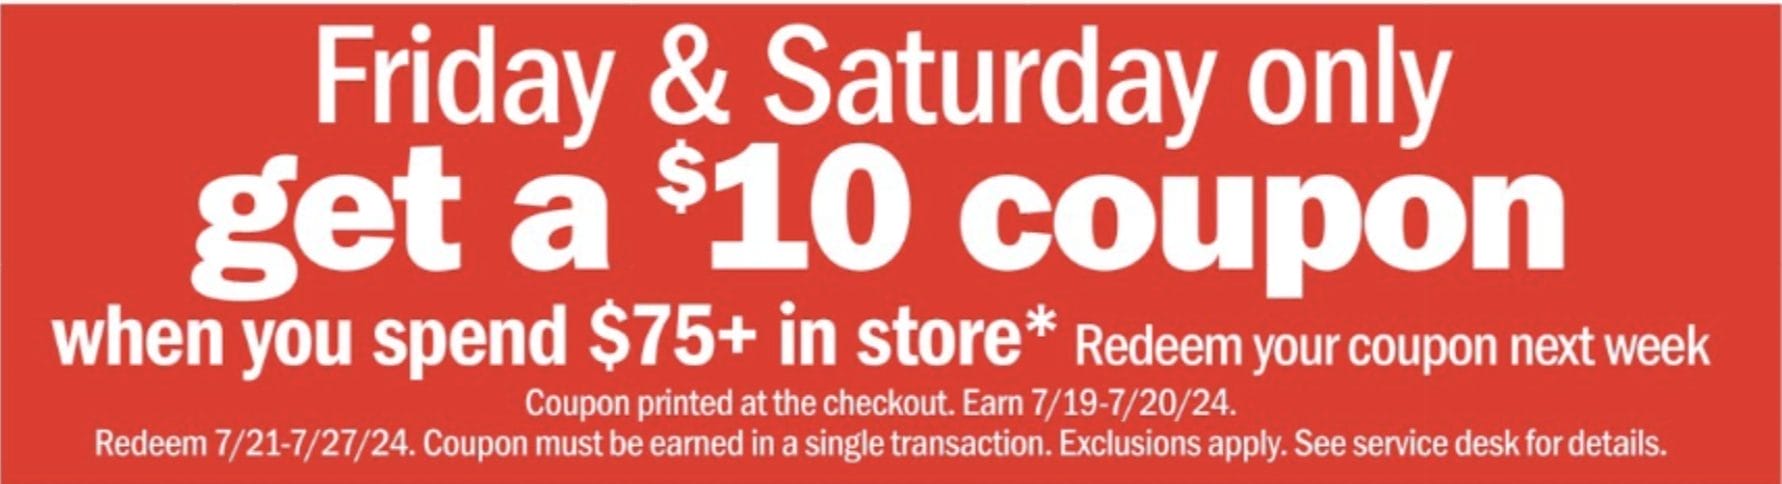 Meijer $10 coupon Friday Saturday